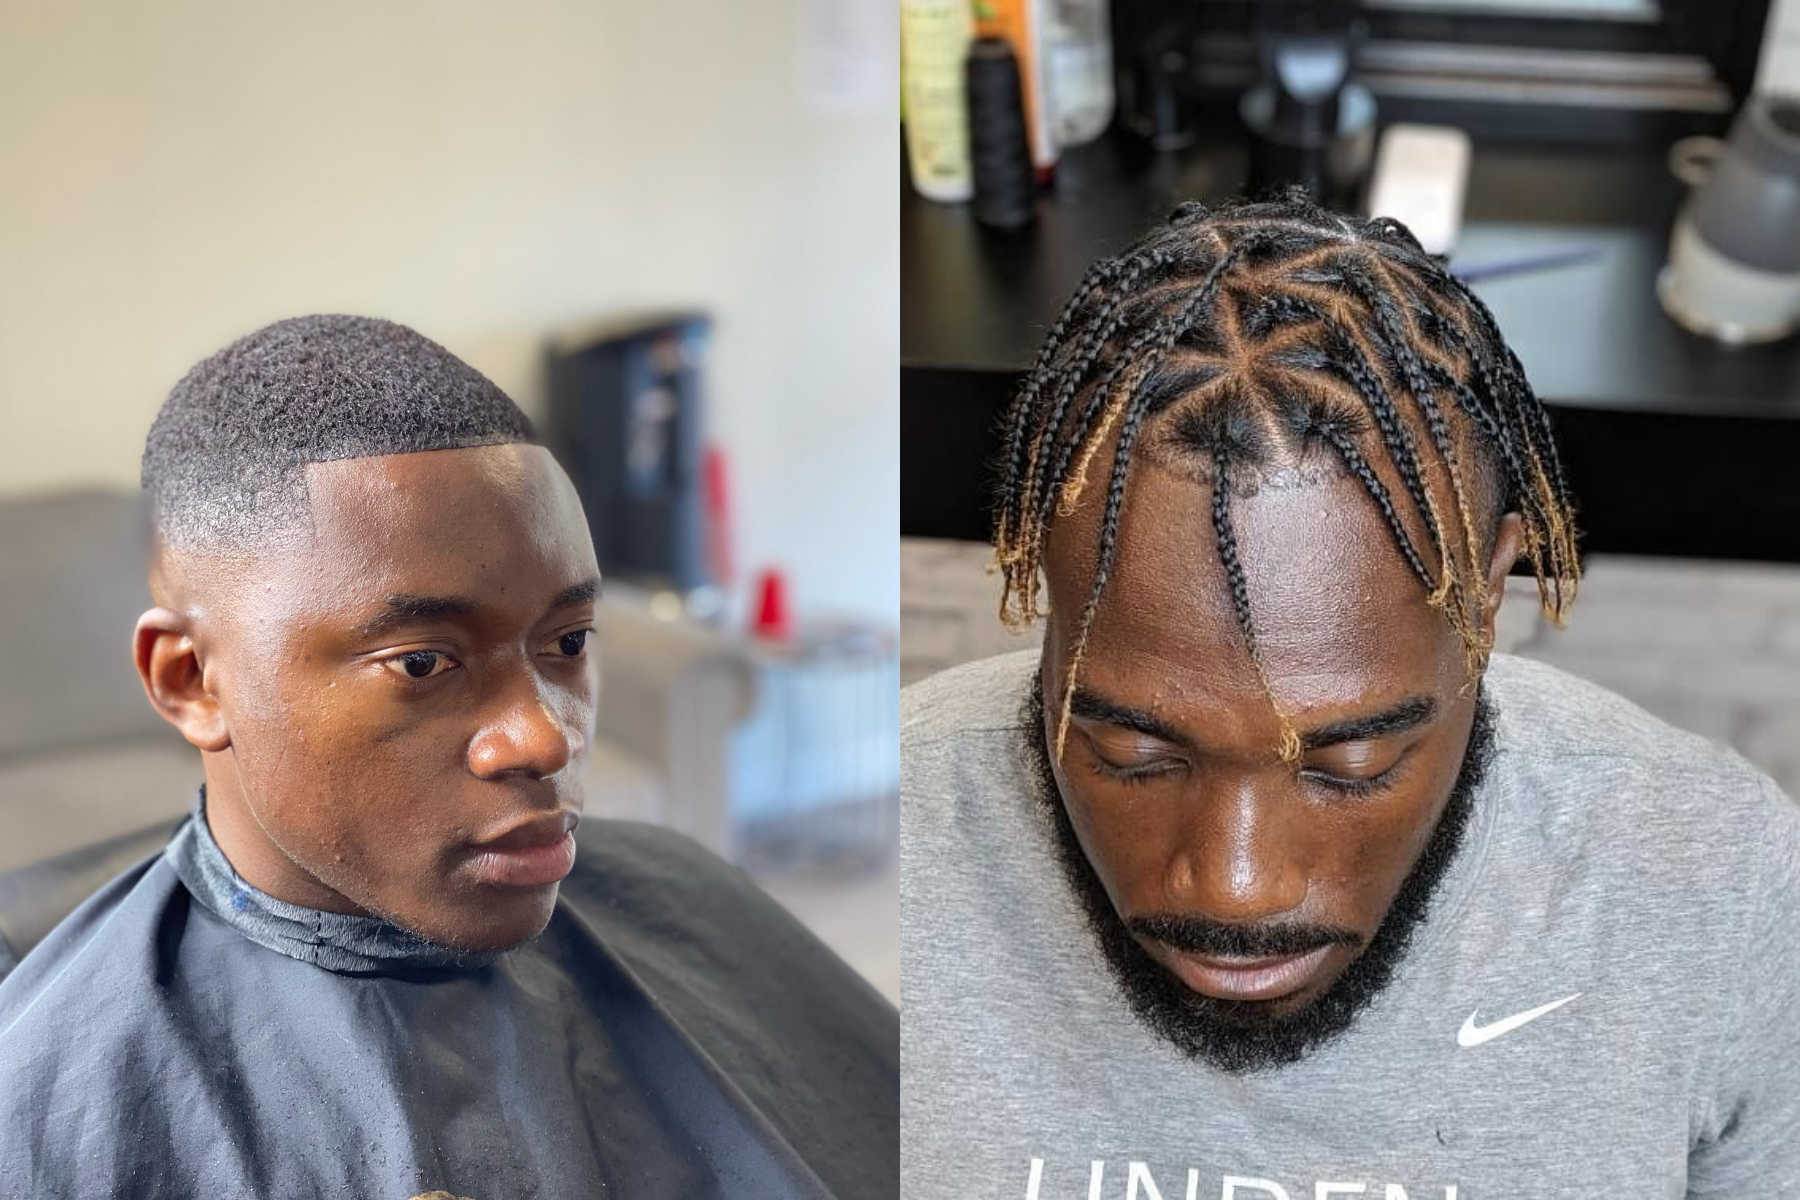 50+ latest African hairstyles for men in Ghana: cool styles to try -  